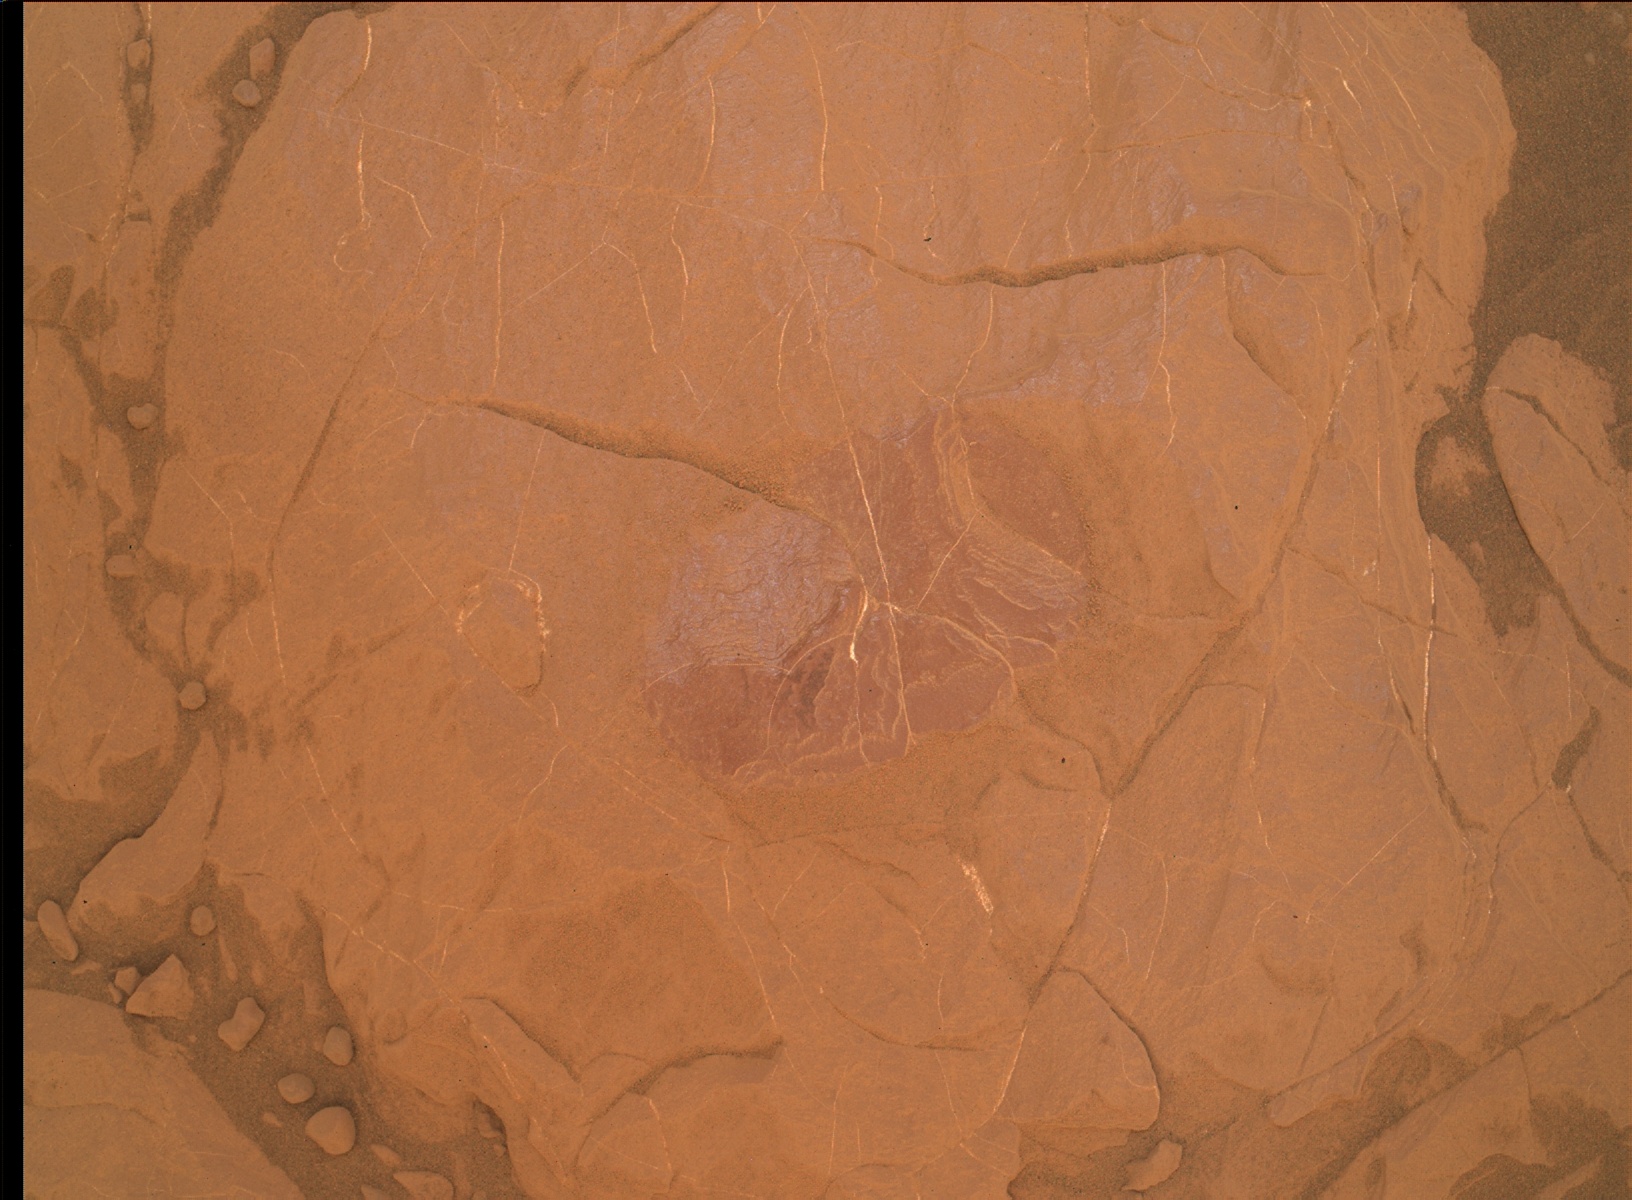 Nasa's Mars rover Curiosity acquired this image using its Mars Hand Lens Imager (MAHLI) on Sol 2109